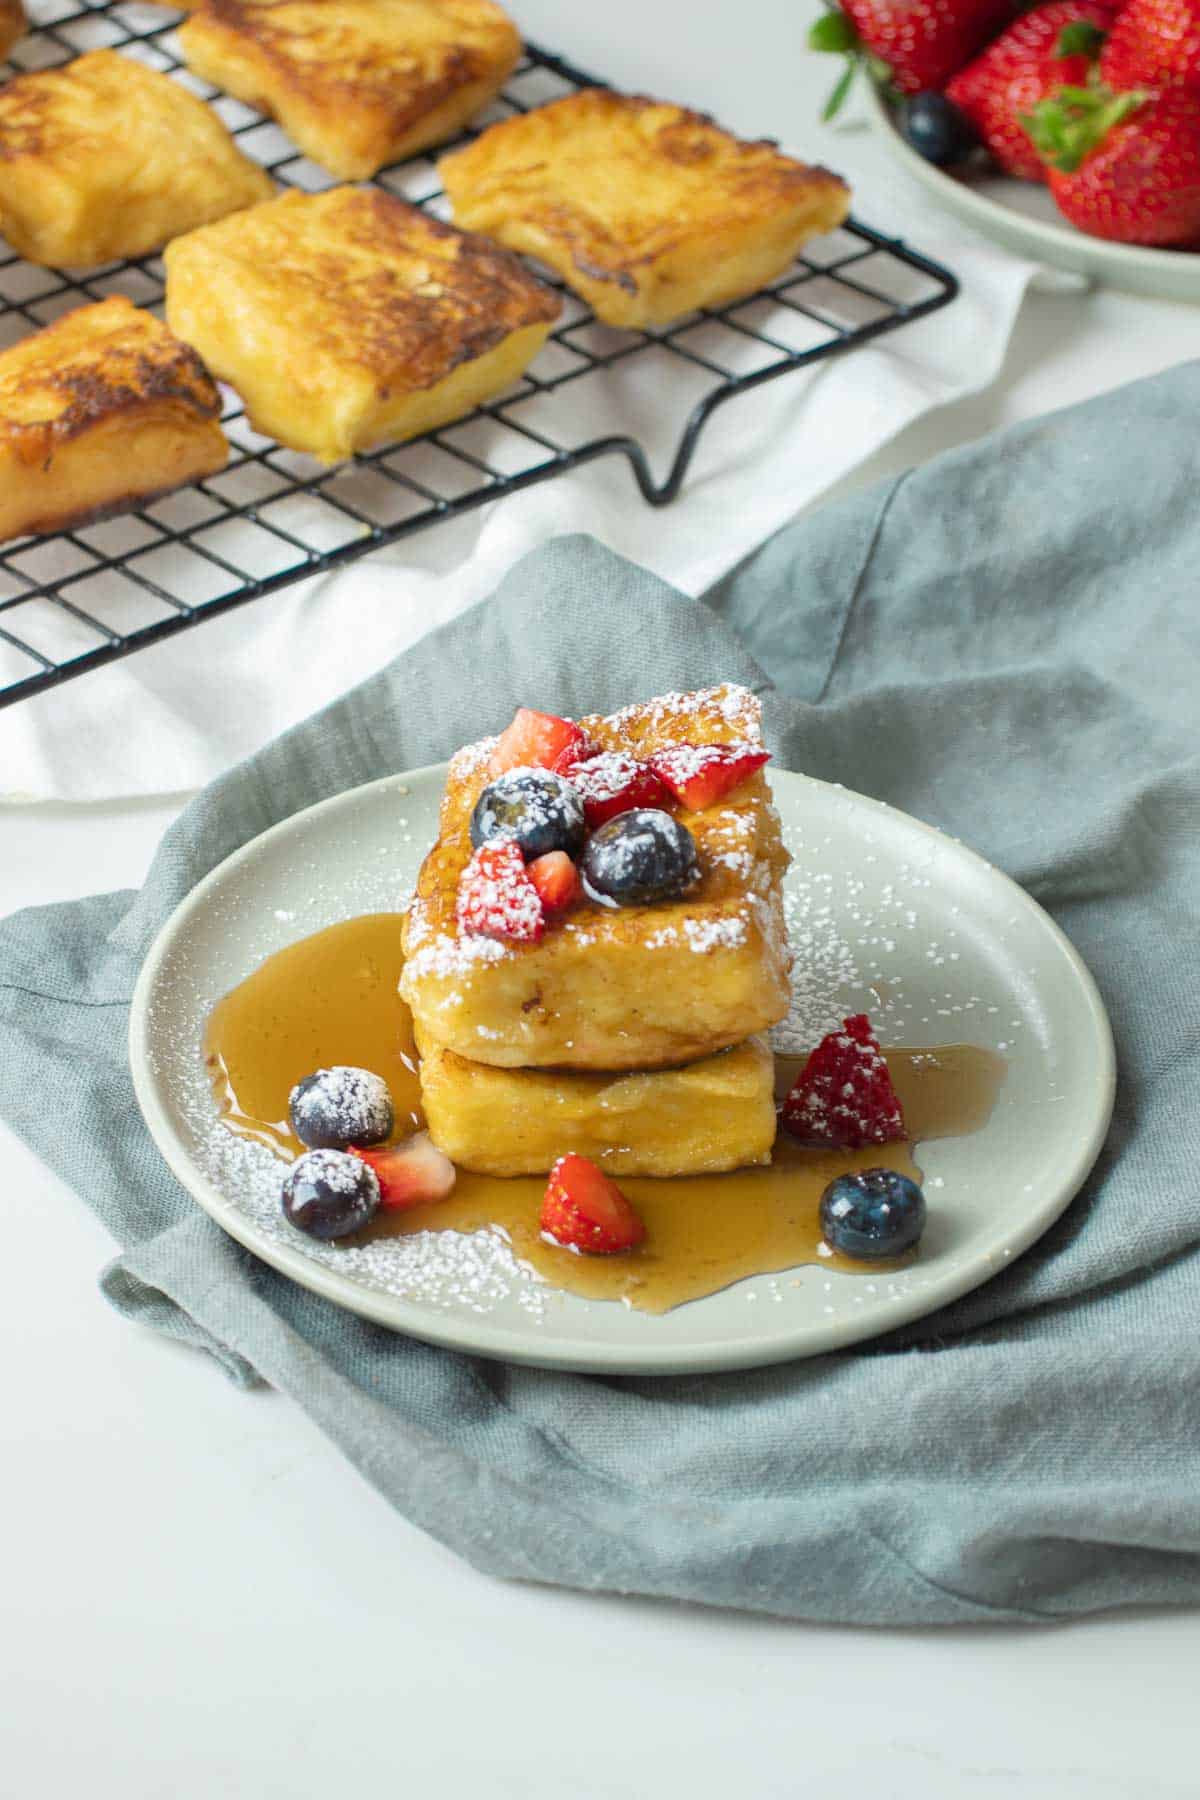 Hawaiian roll french toast stacked on a small plate with syrup and fruit.